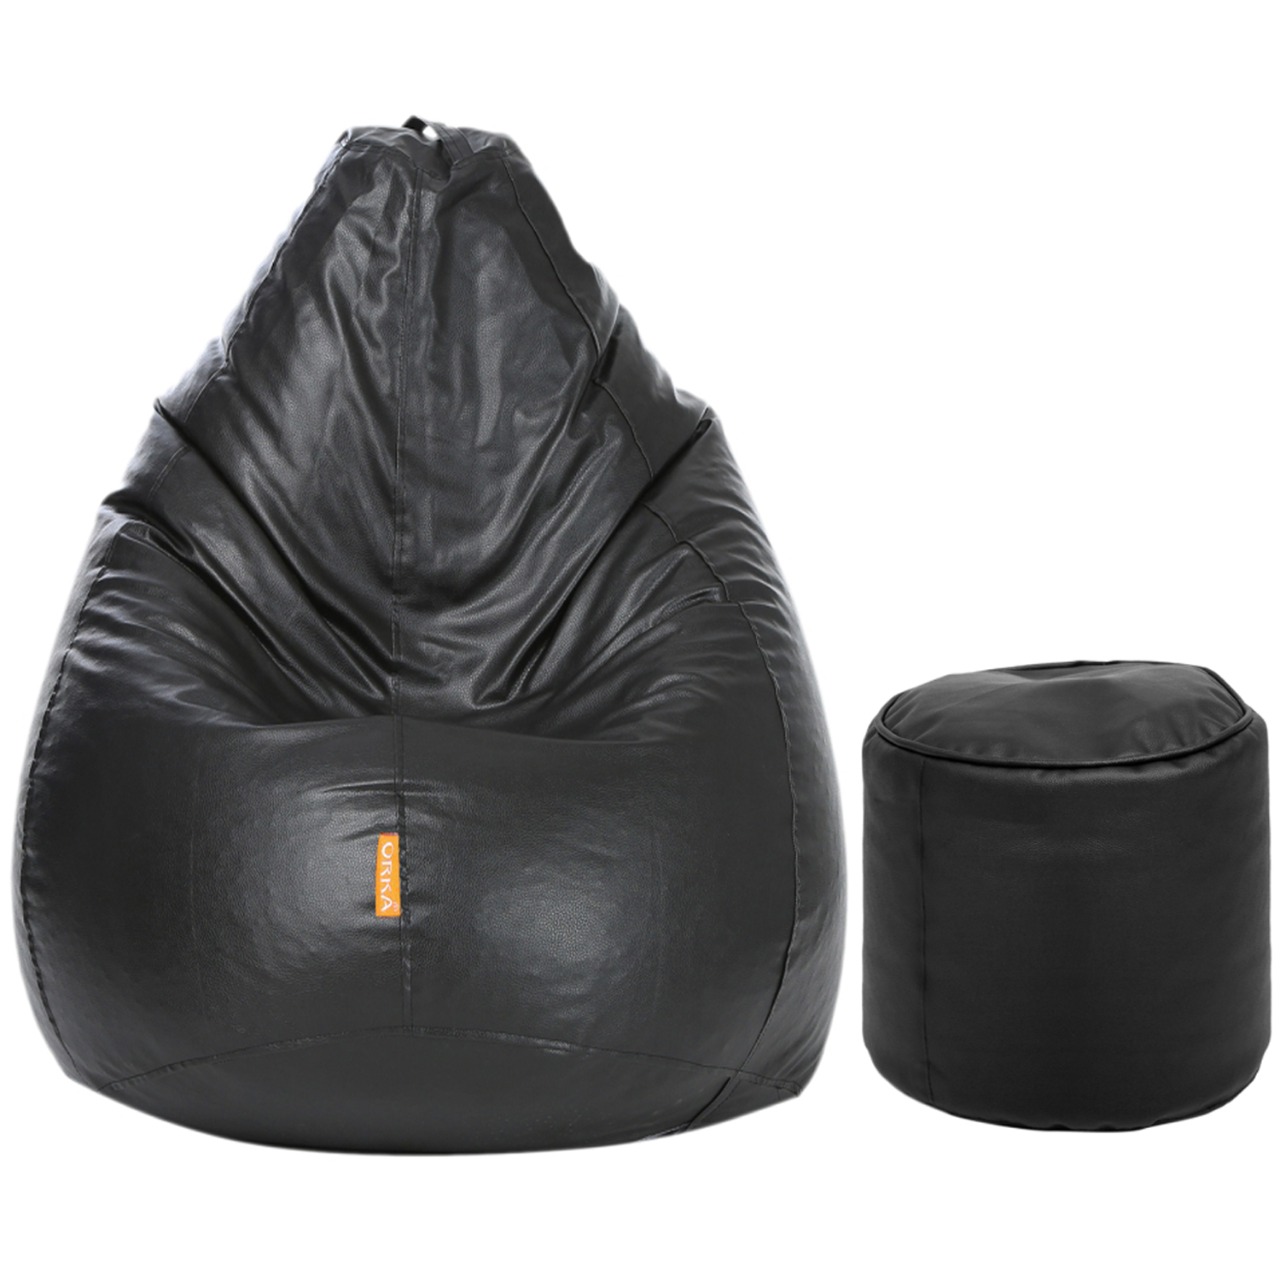 ORKA Classic Black Bean Bag With Matching Puffy